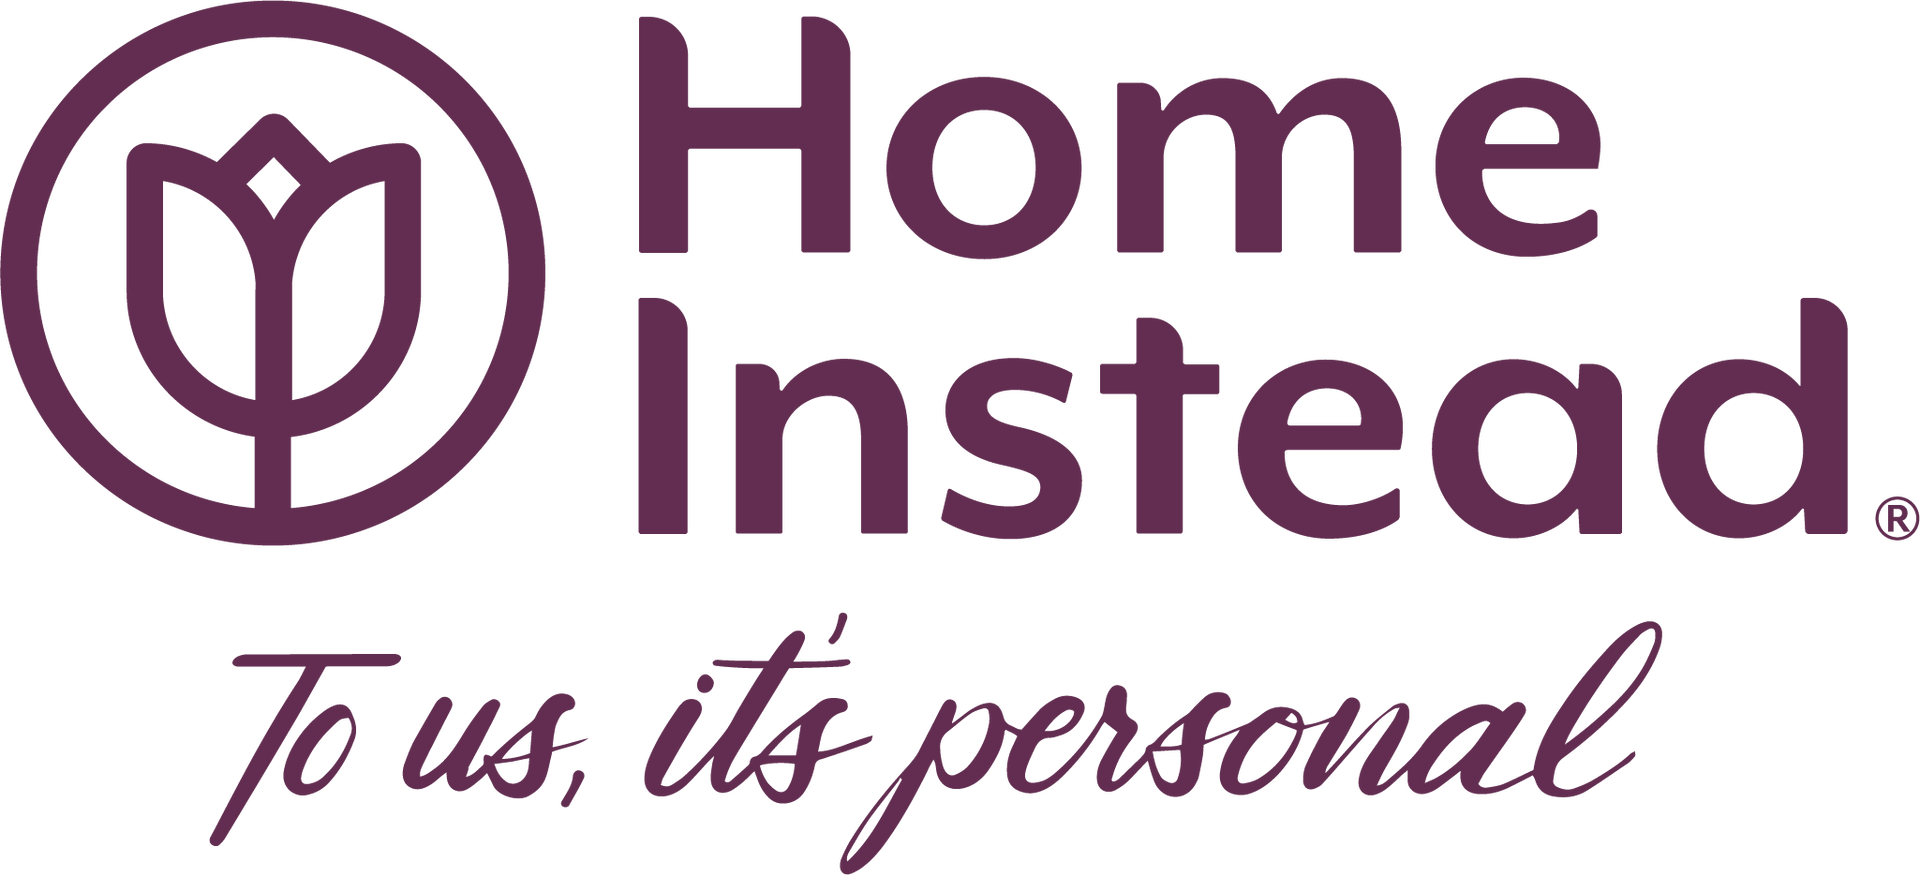 the home instead logo is purple and black and says `` to us , it 's personal '' .